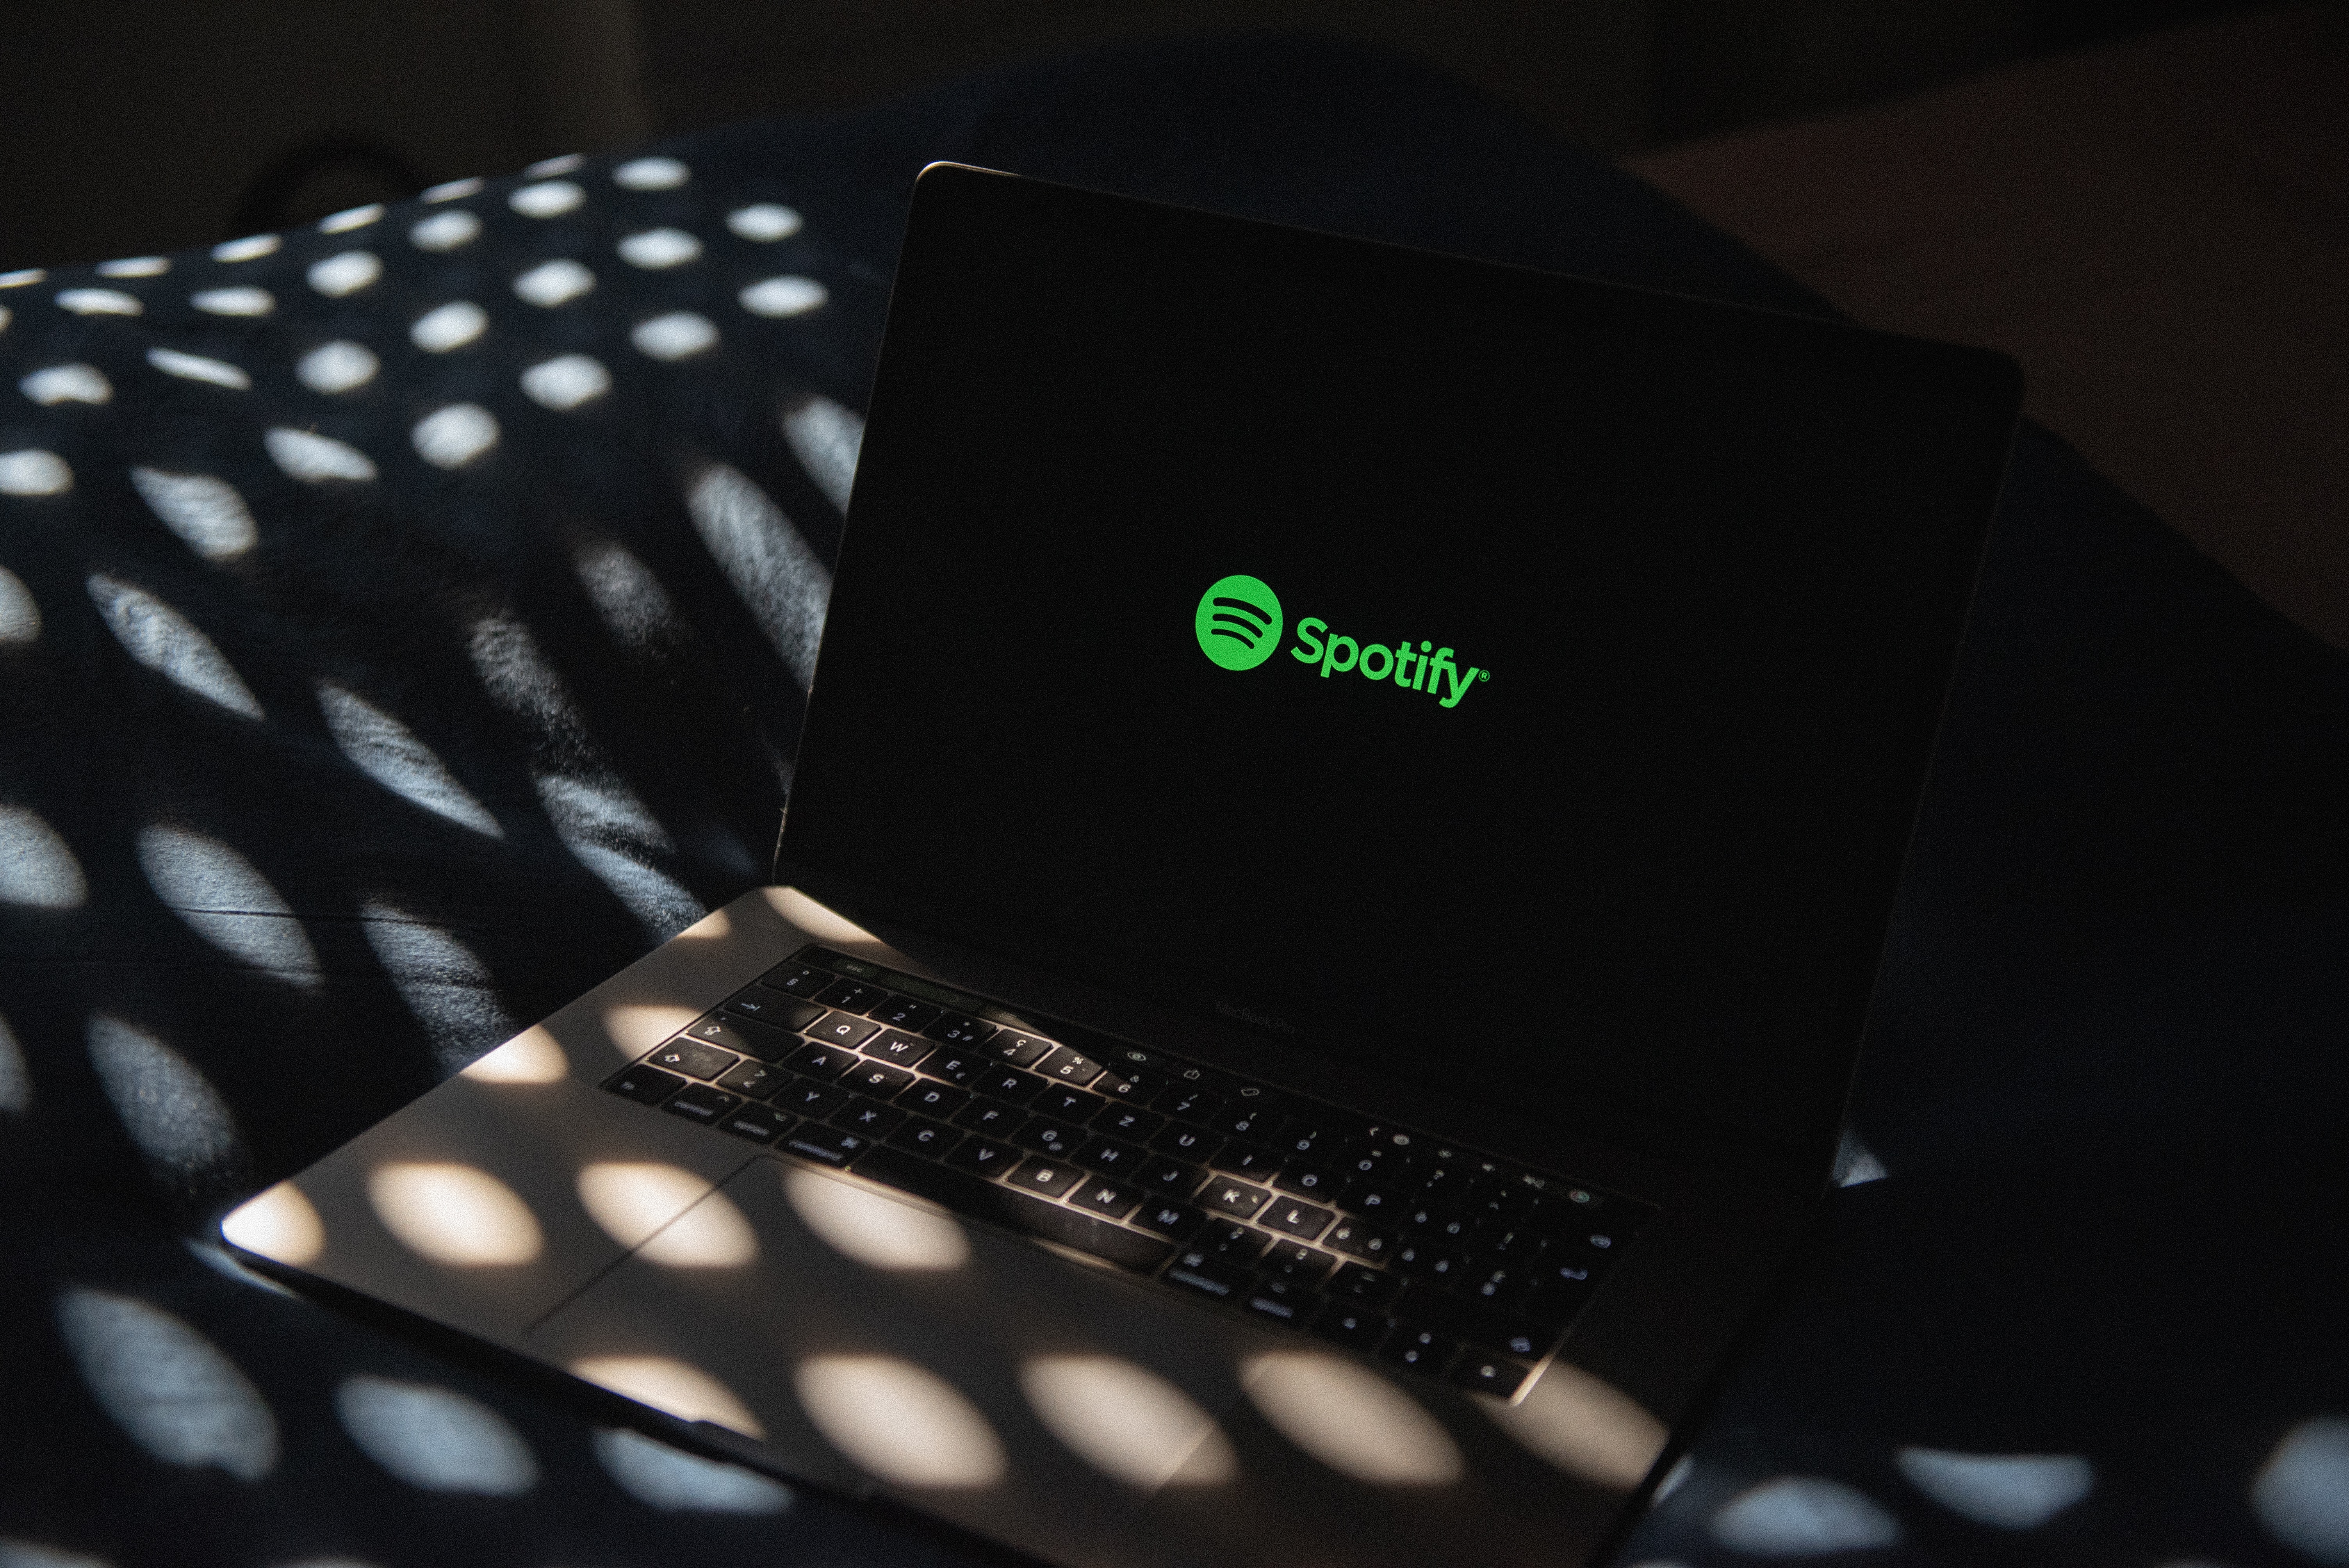 Spotify: The Ultimate Music Streaming Platform